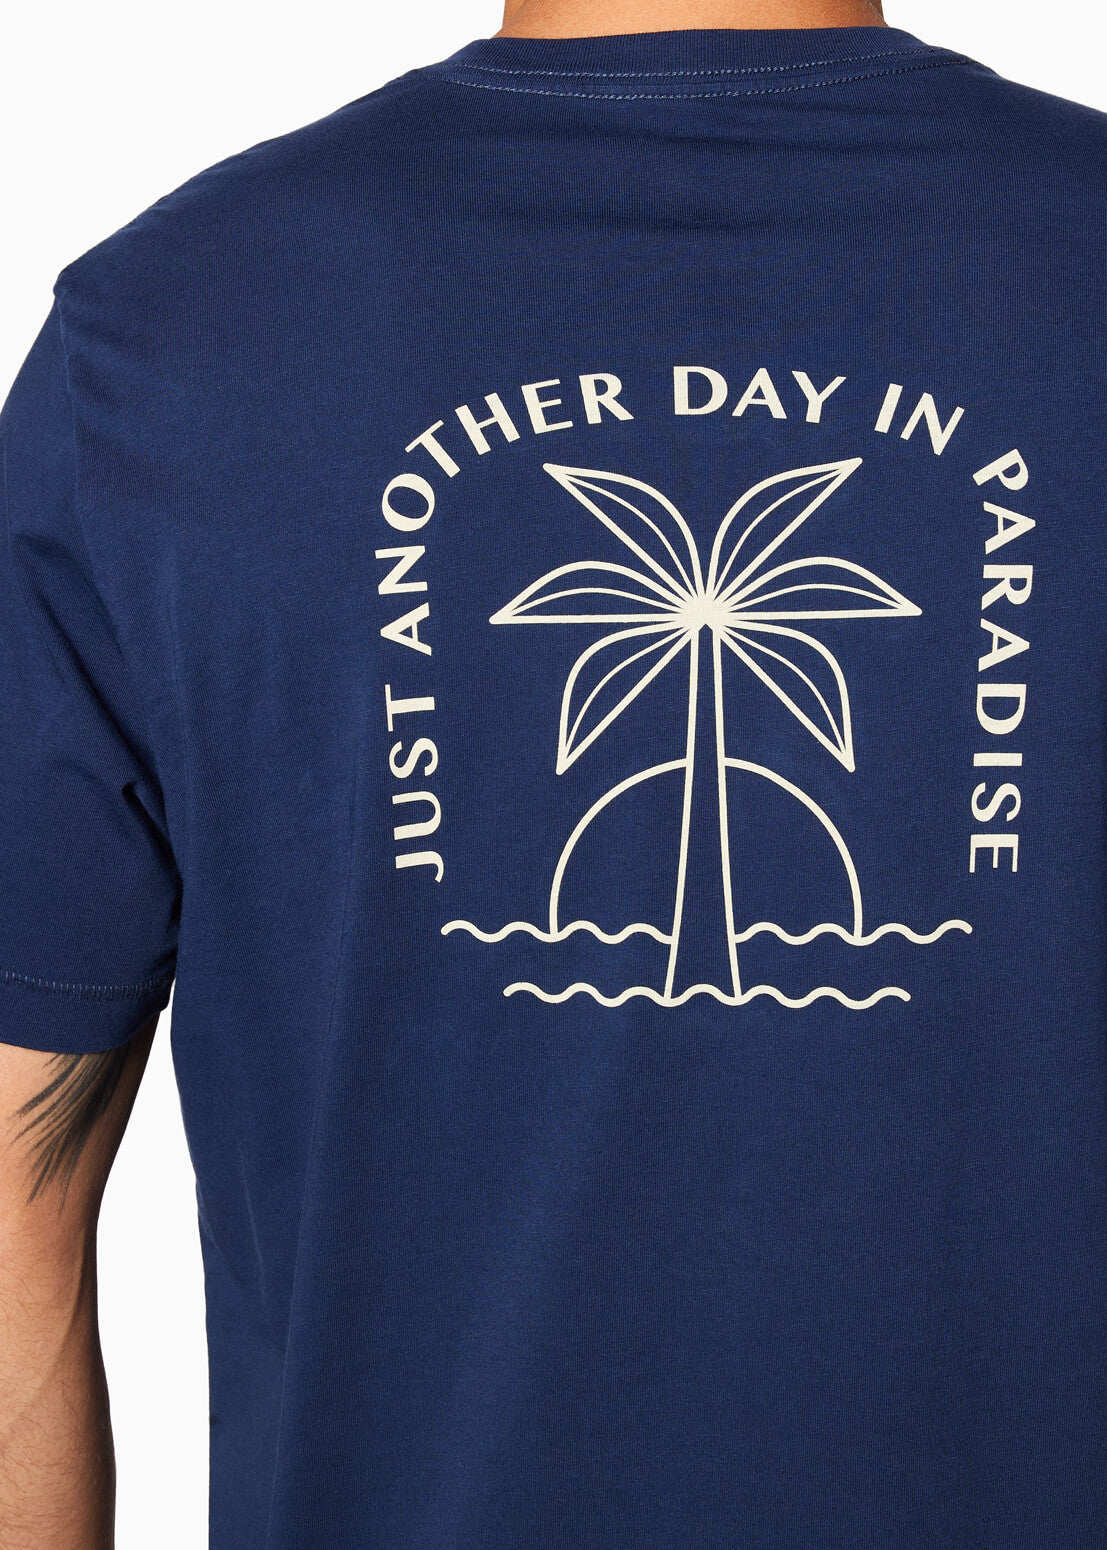 Another Day | Short Sleeve T-Shirt